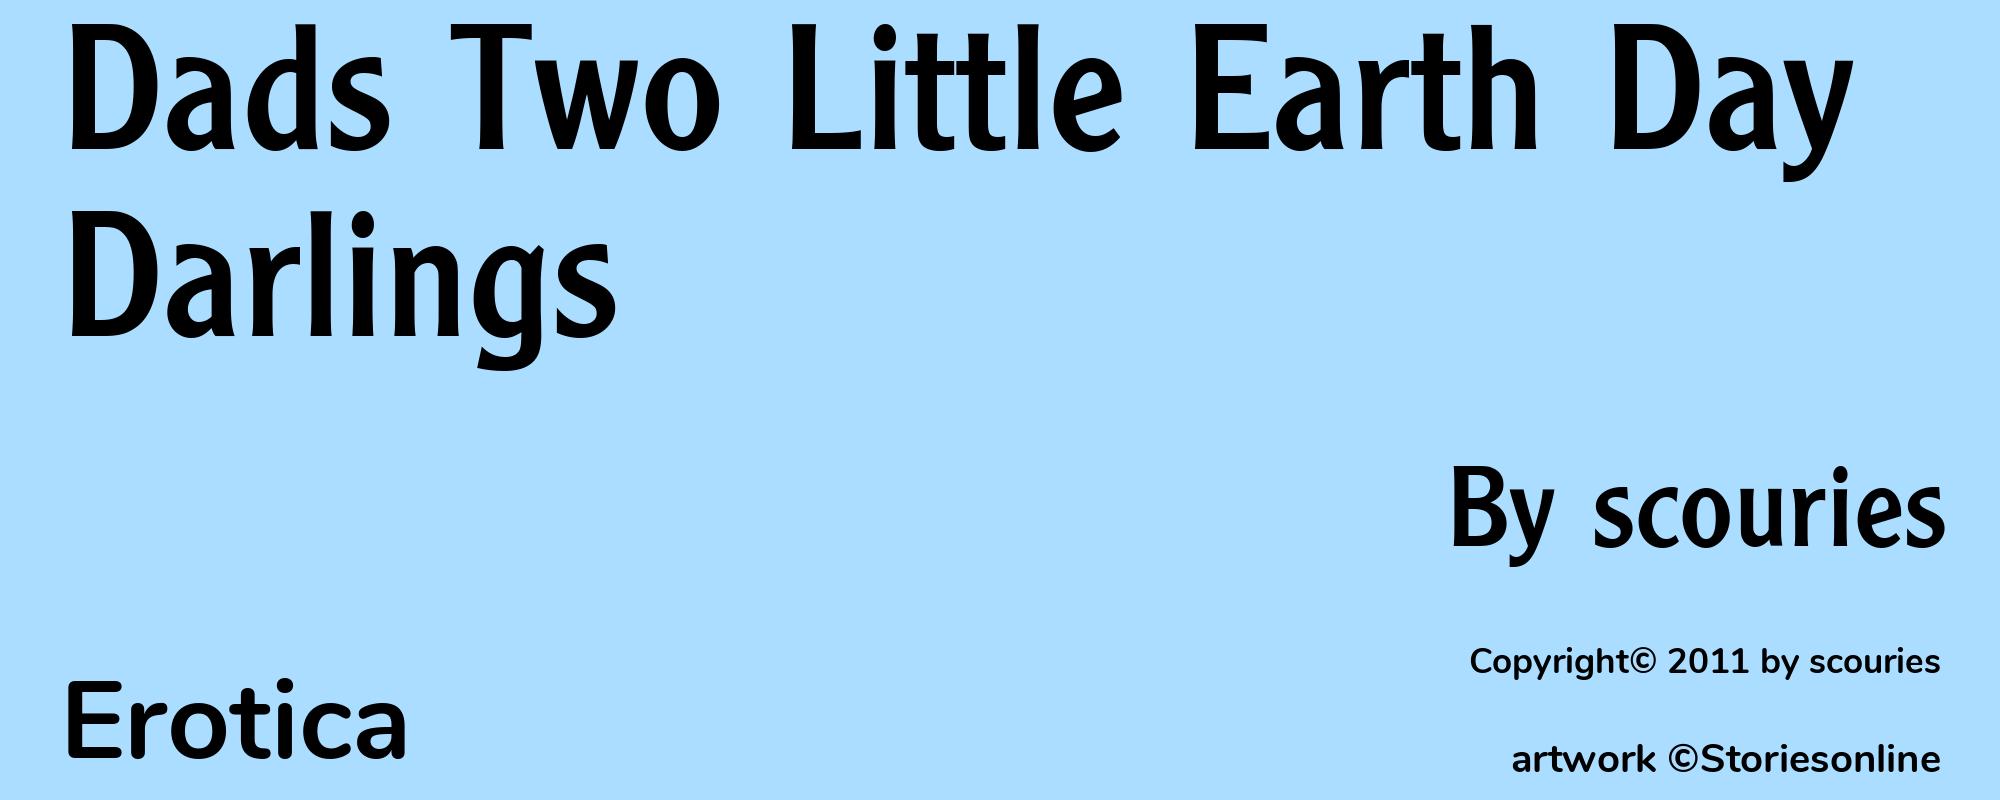 Dads Two Little Earth Day Darlings - Cover